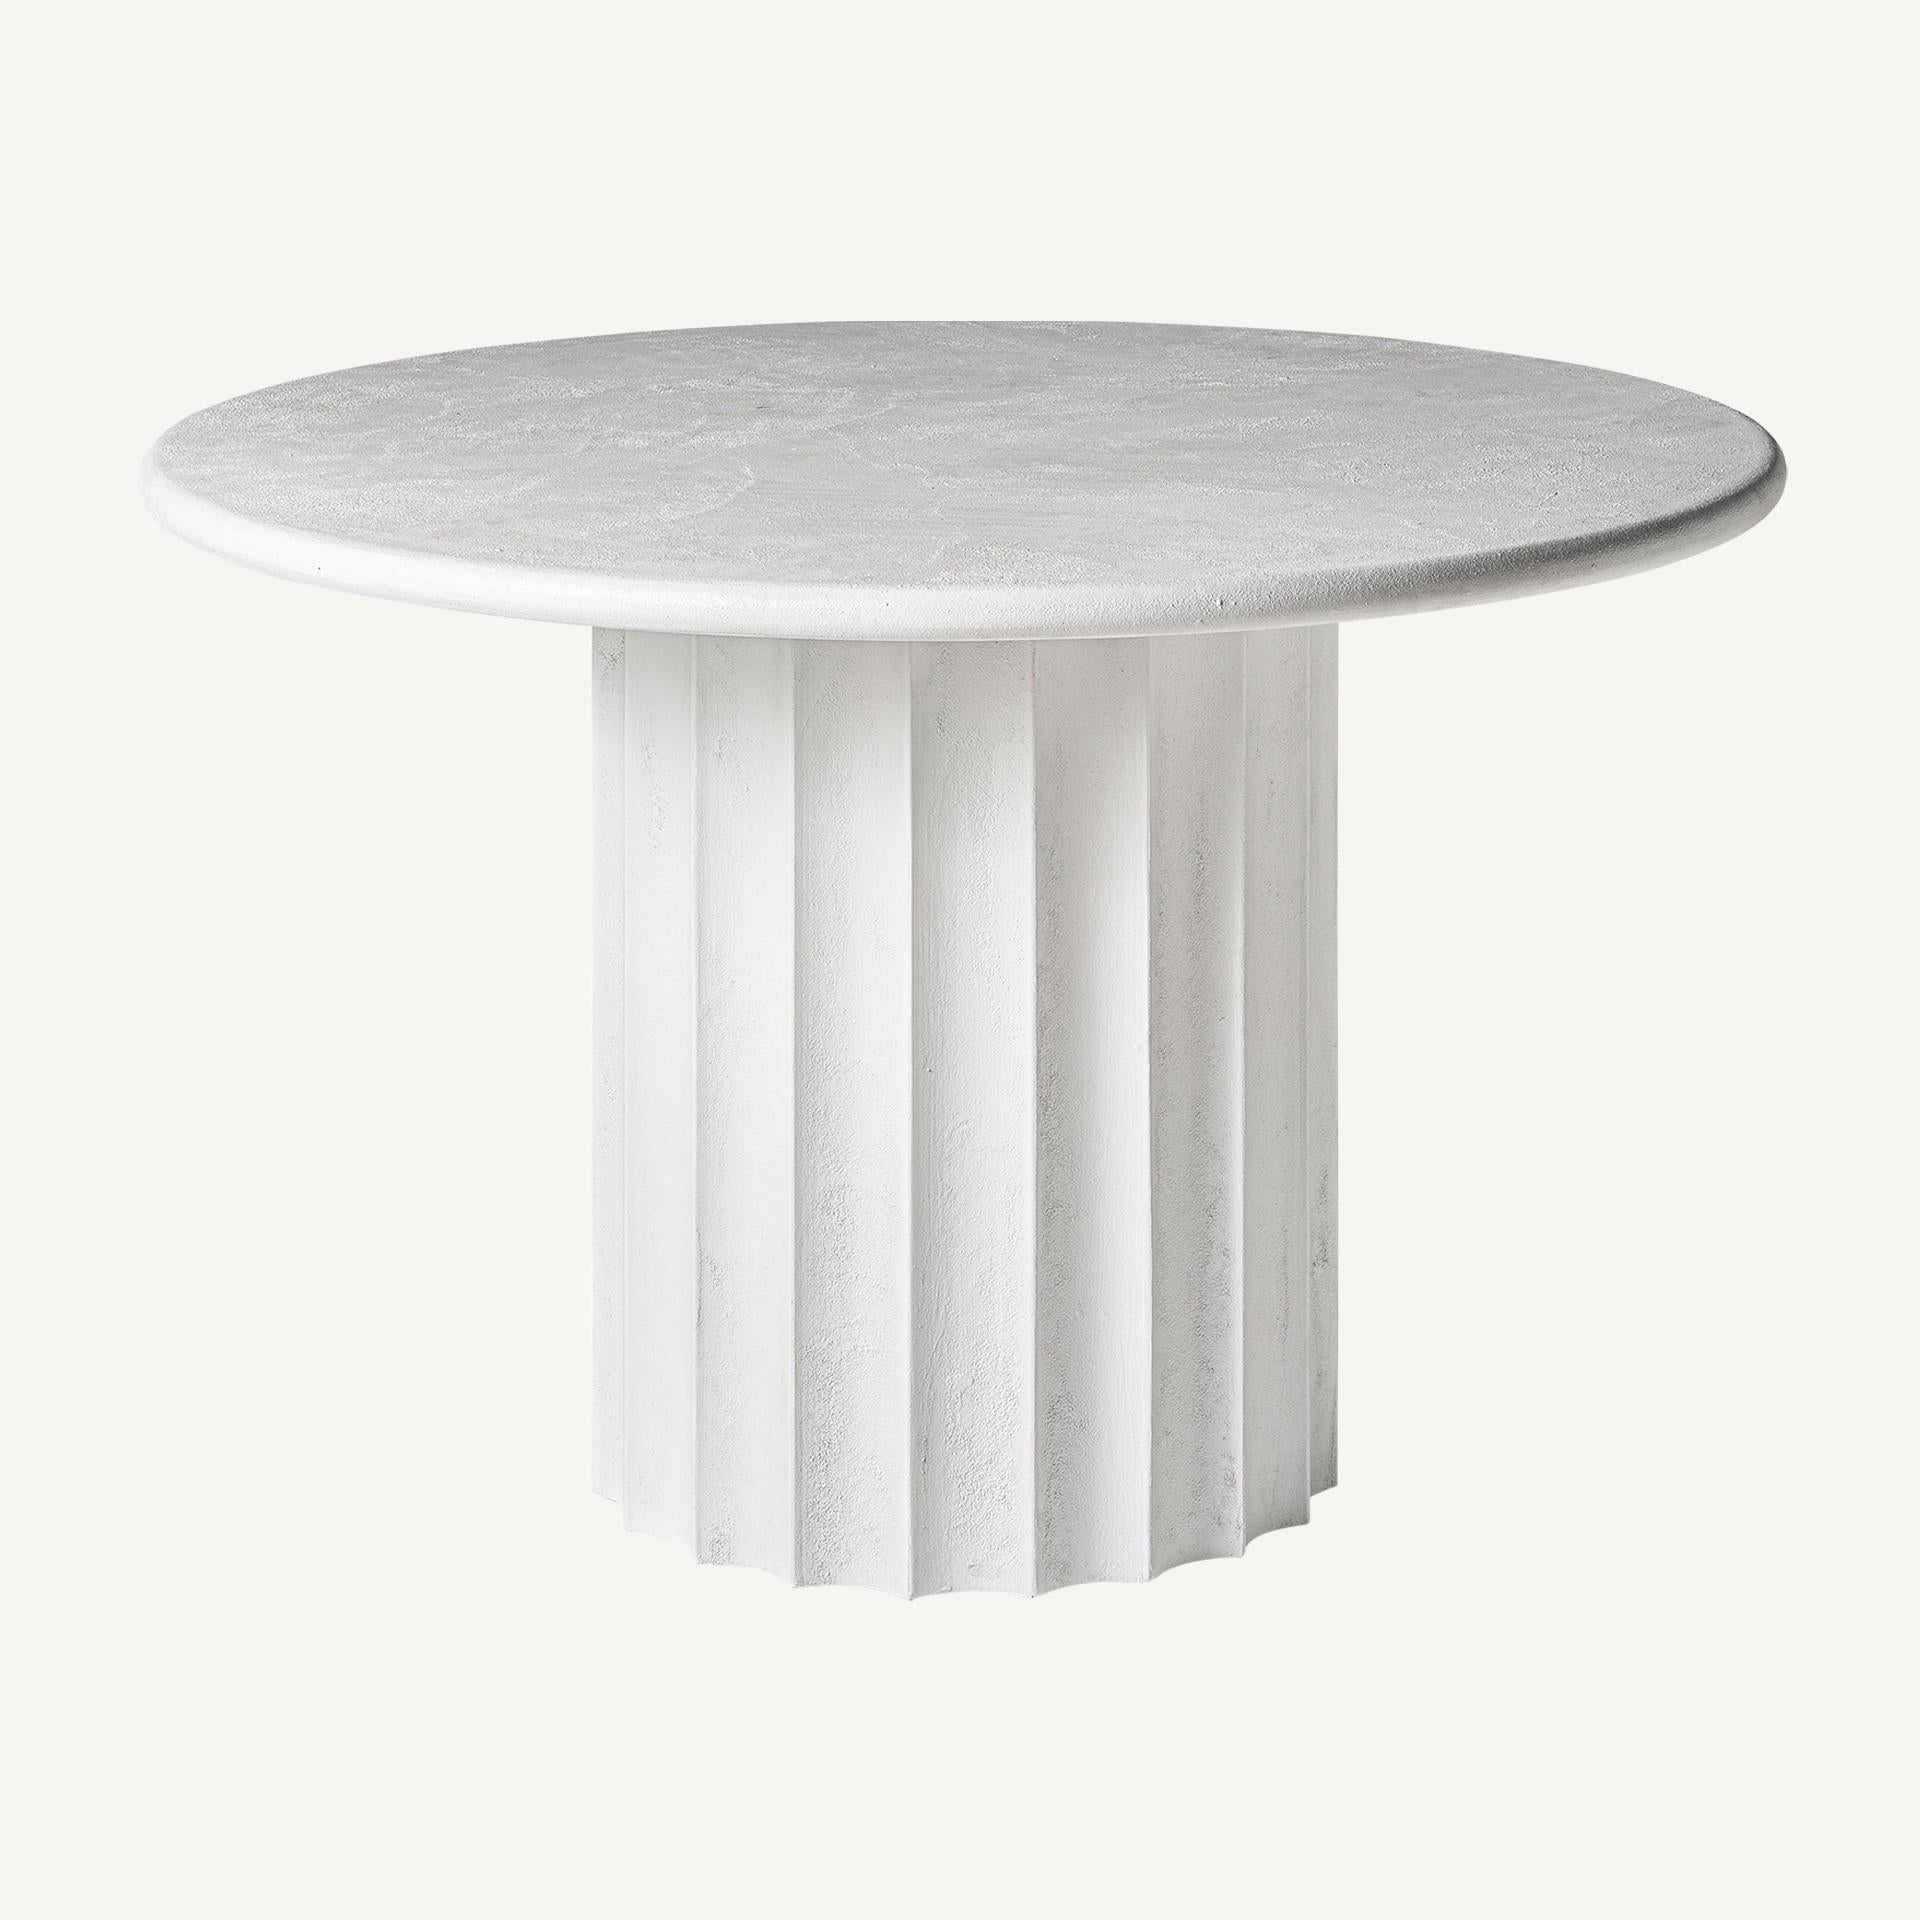 Italian 1970s Design Style White Concrete Pedestal Table In New Condition For Sale In Tourcoing, FR